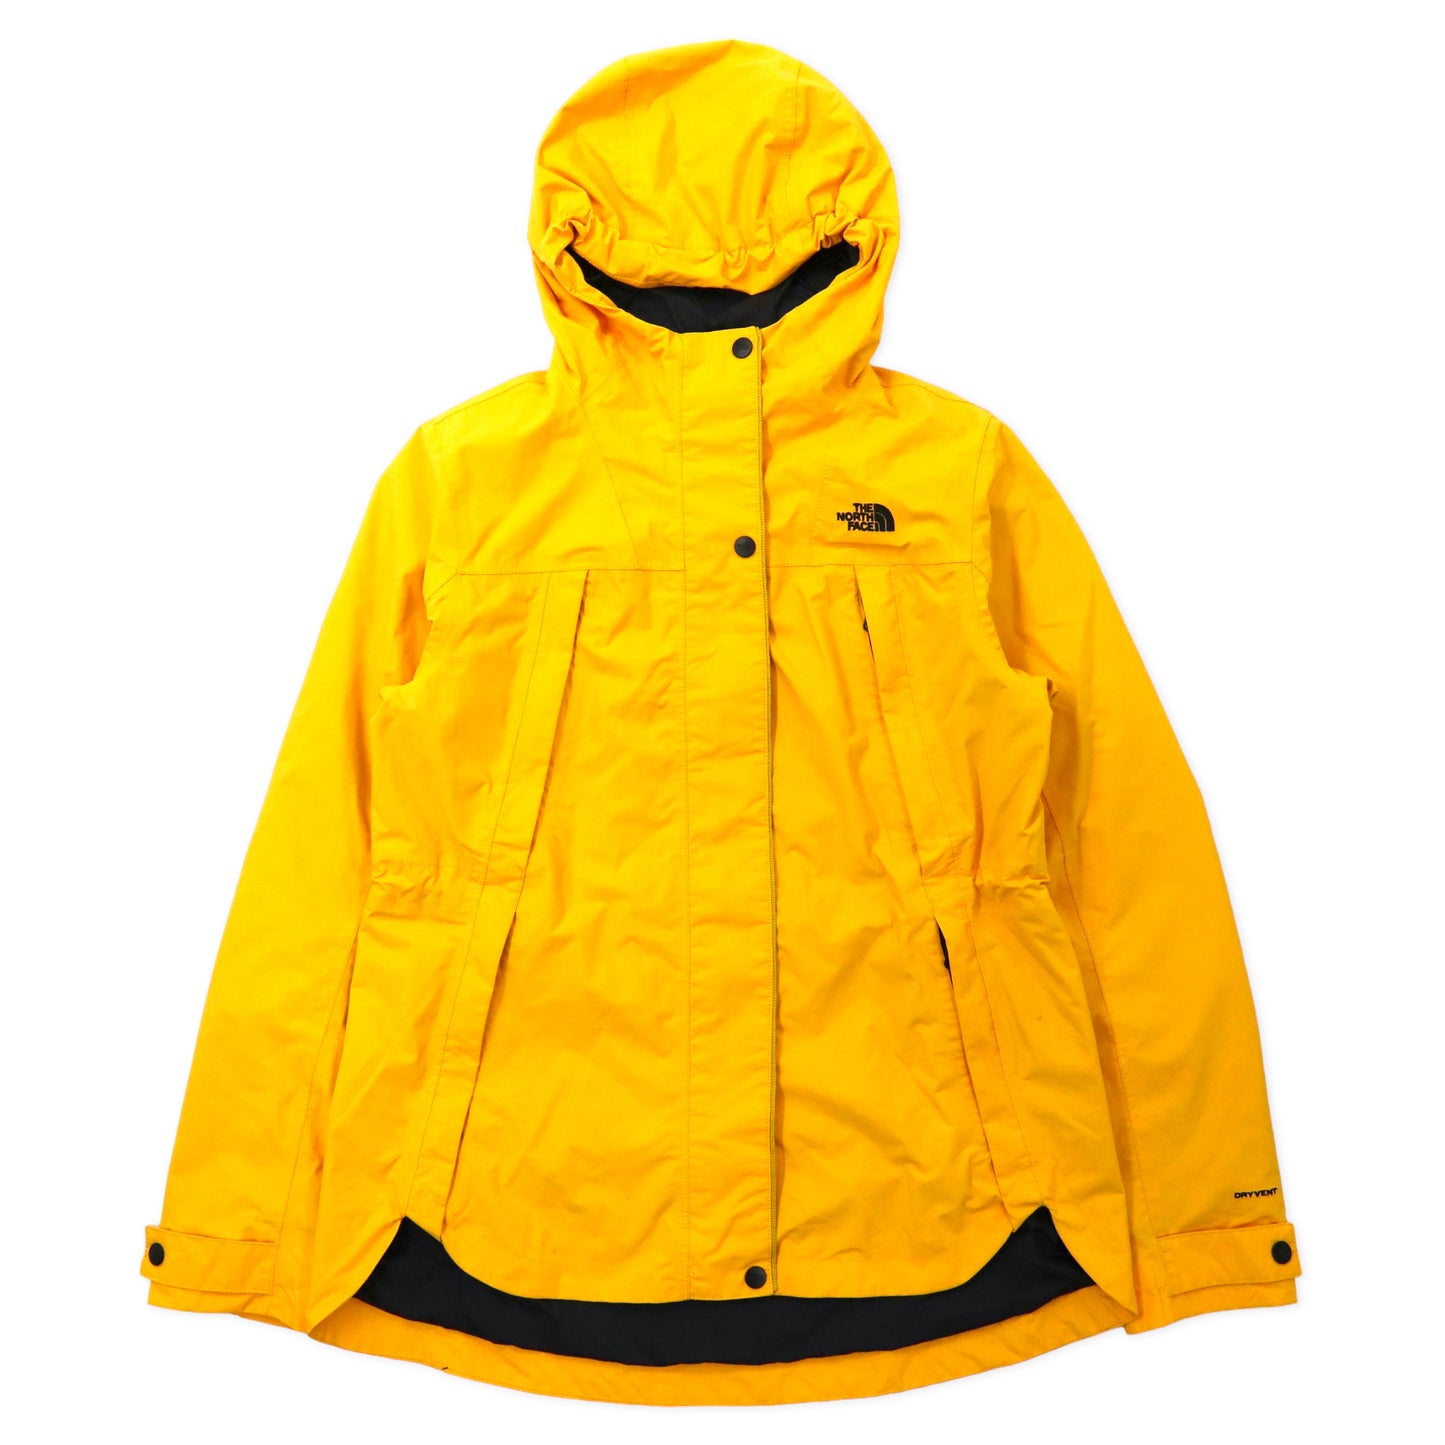 THE NORTH FACE Mountain HOODIE M Yellow Nylon Dryvent Waterproof